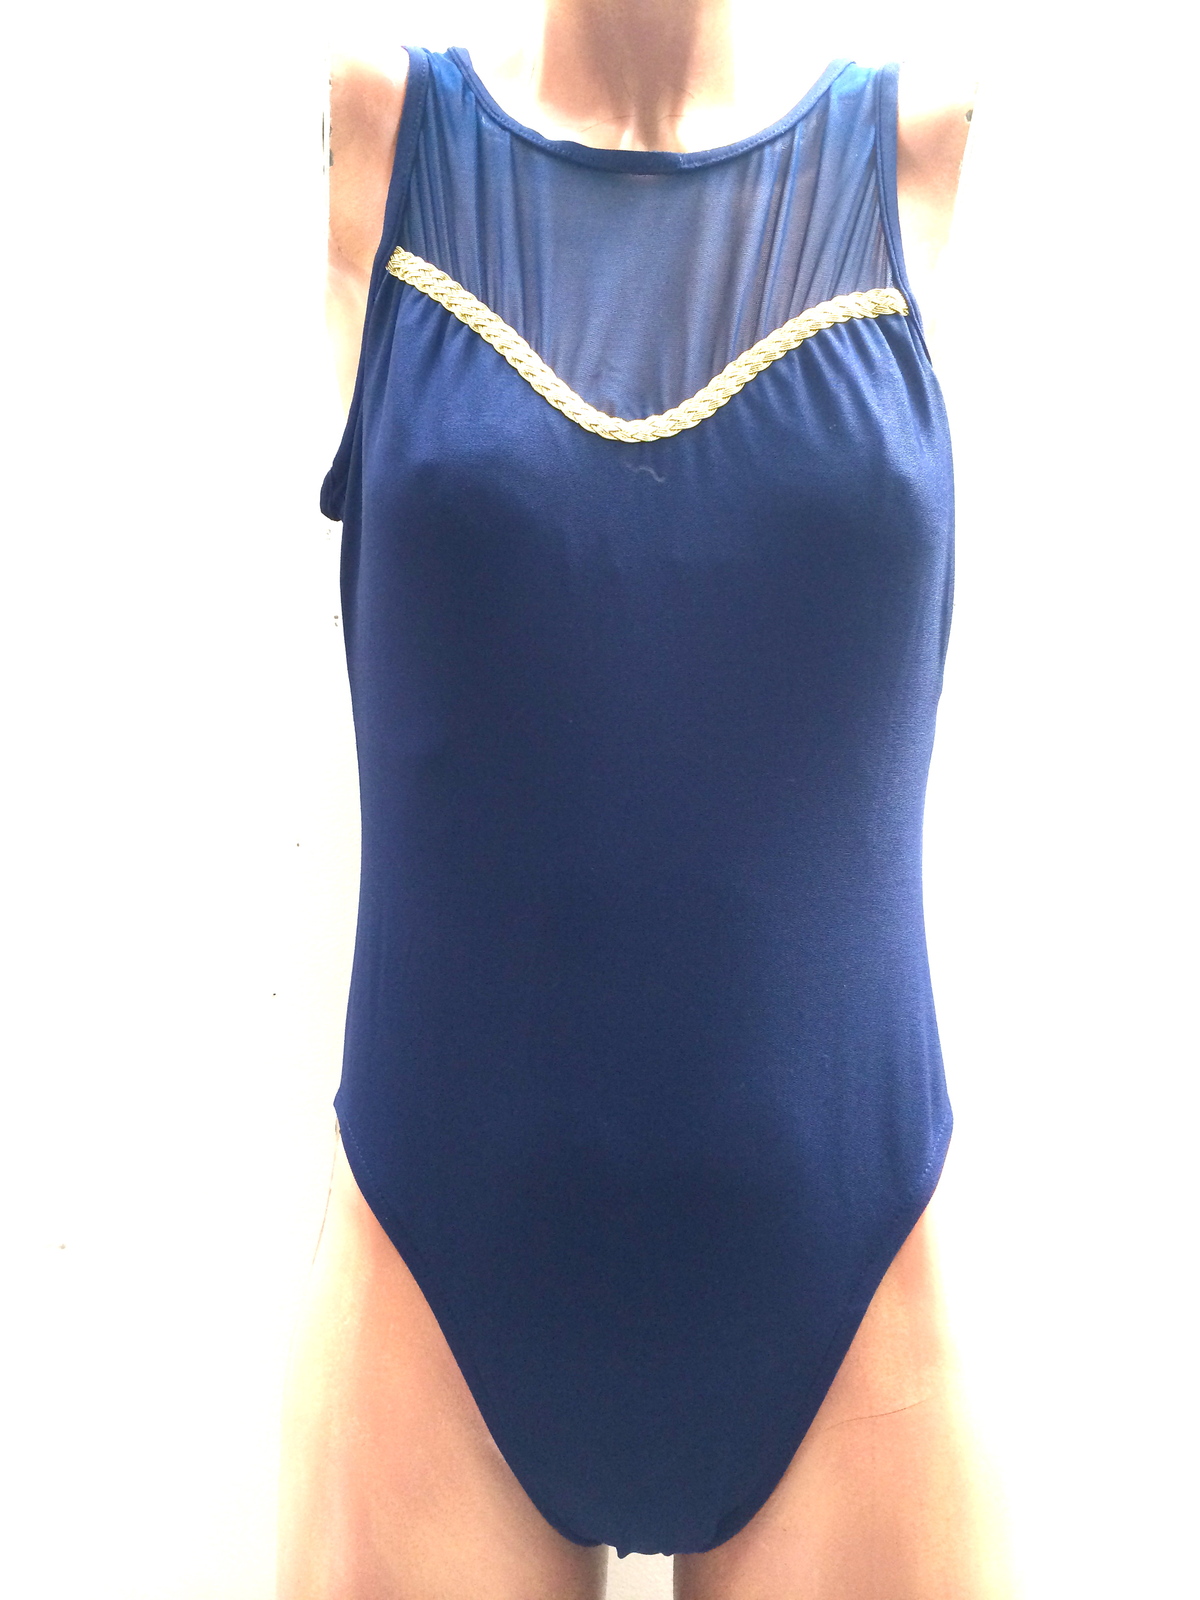 Kathy Ireland Navy Blue Gold One Piece Bathing Suit Authentic Vintage ...